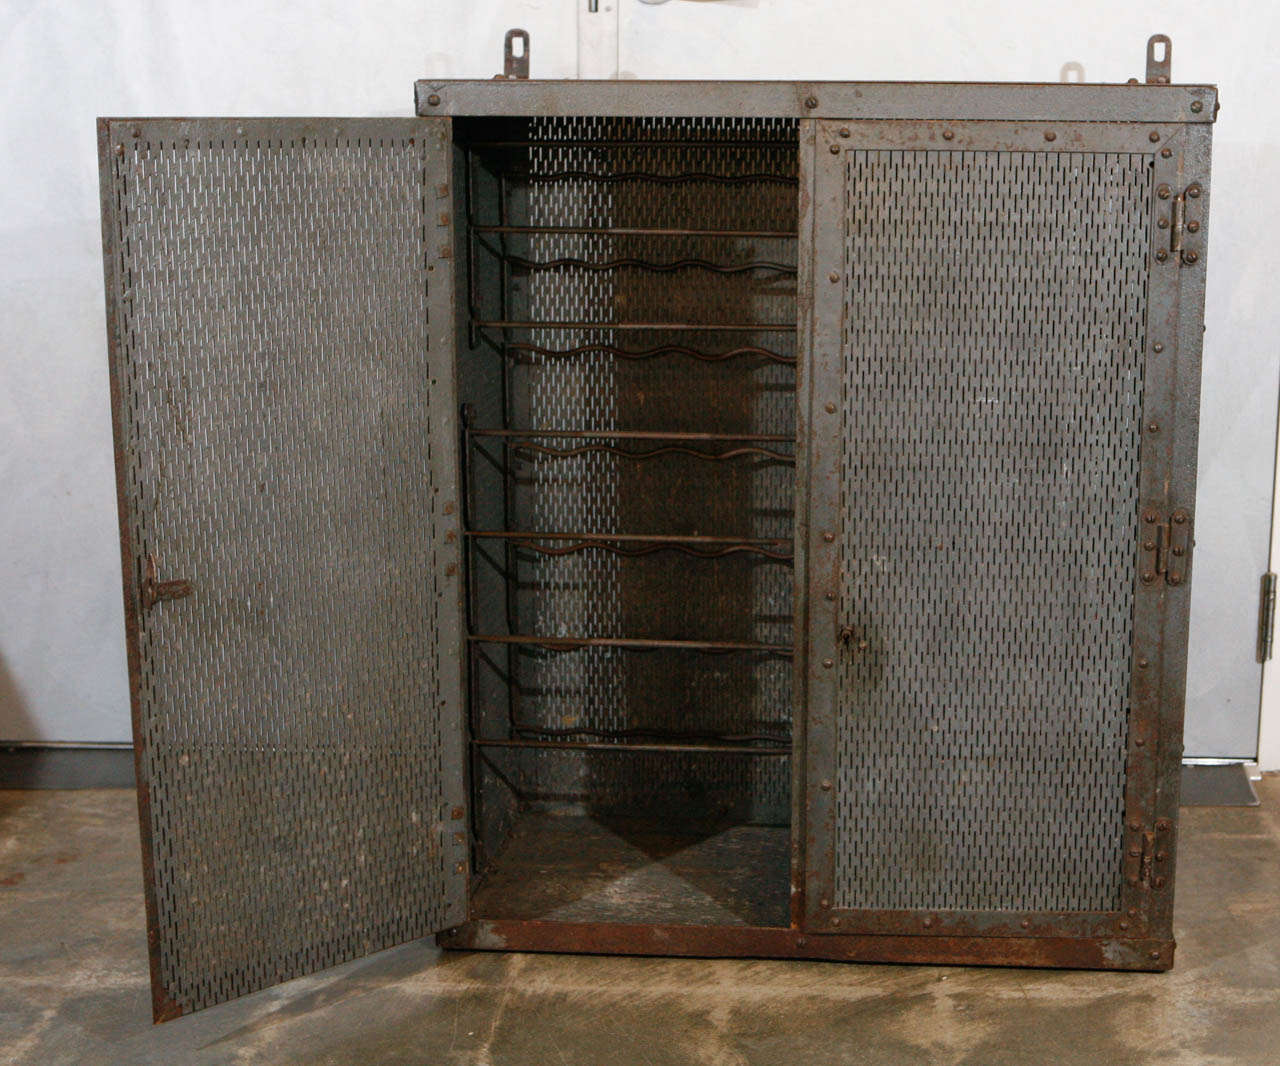 This handsome french industrial metal cabinet from the 1930's was converted into a wine safe at some point in it's history. Note the elegant weave of the wire mesh walls and slender shape of the hinges and a beautiful patina throughout.  The piece